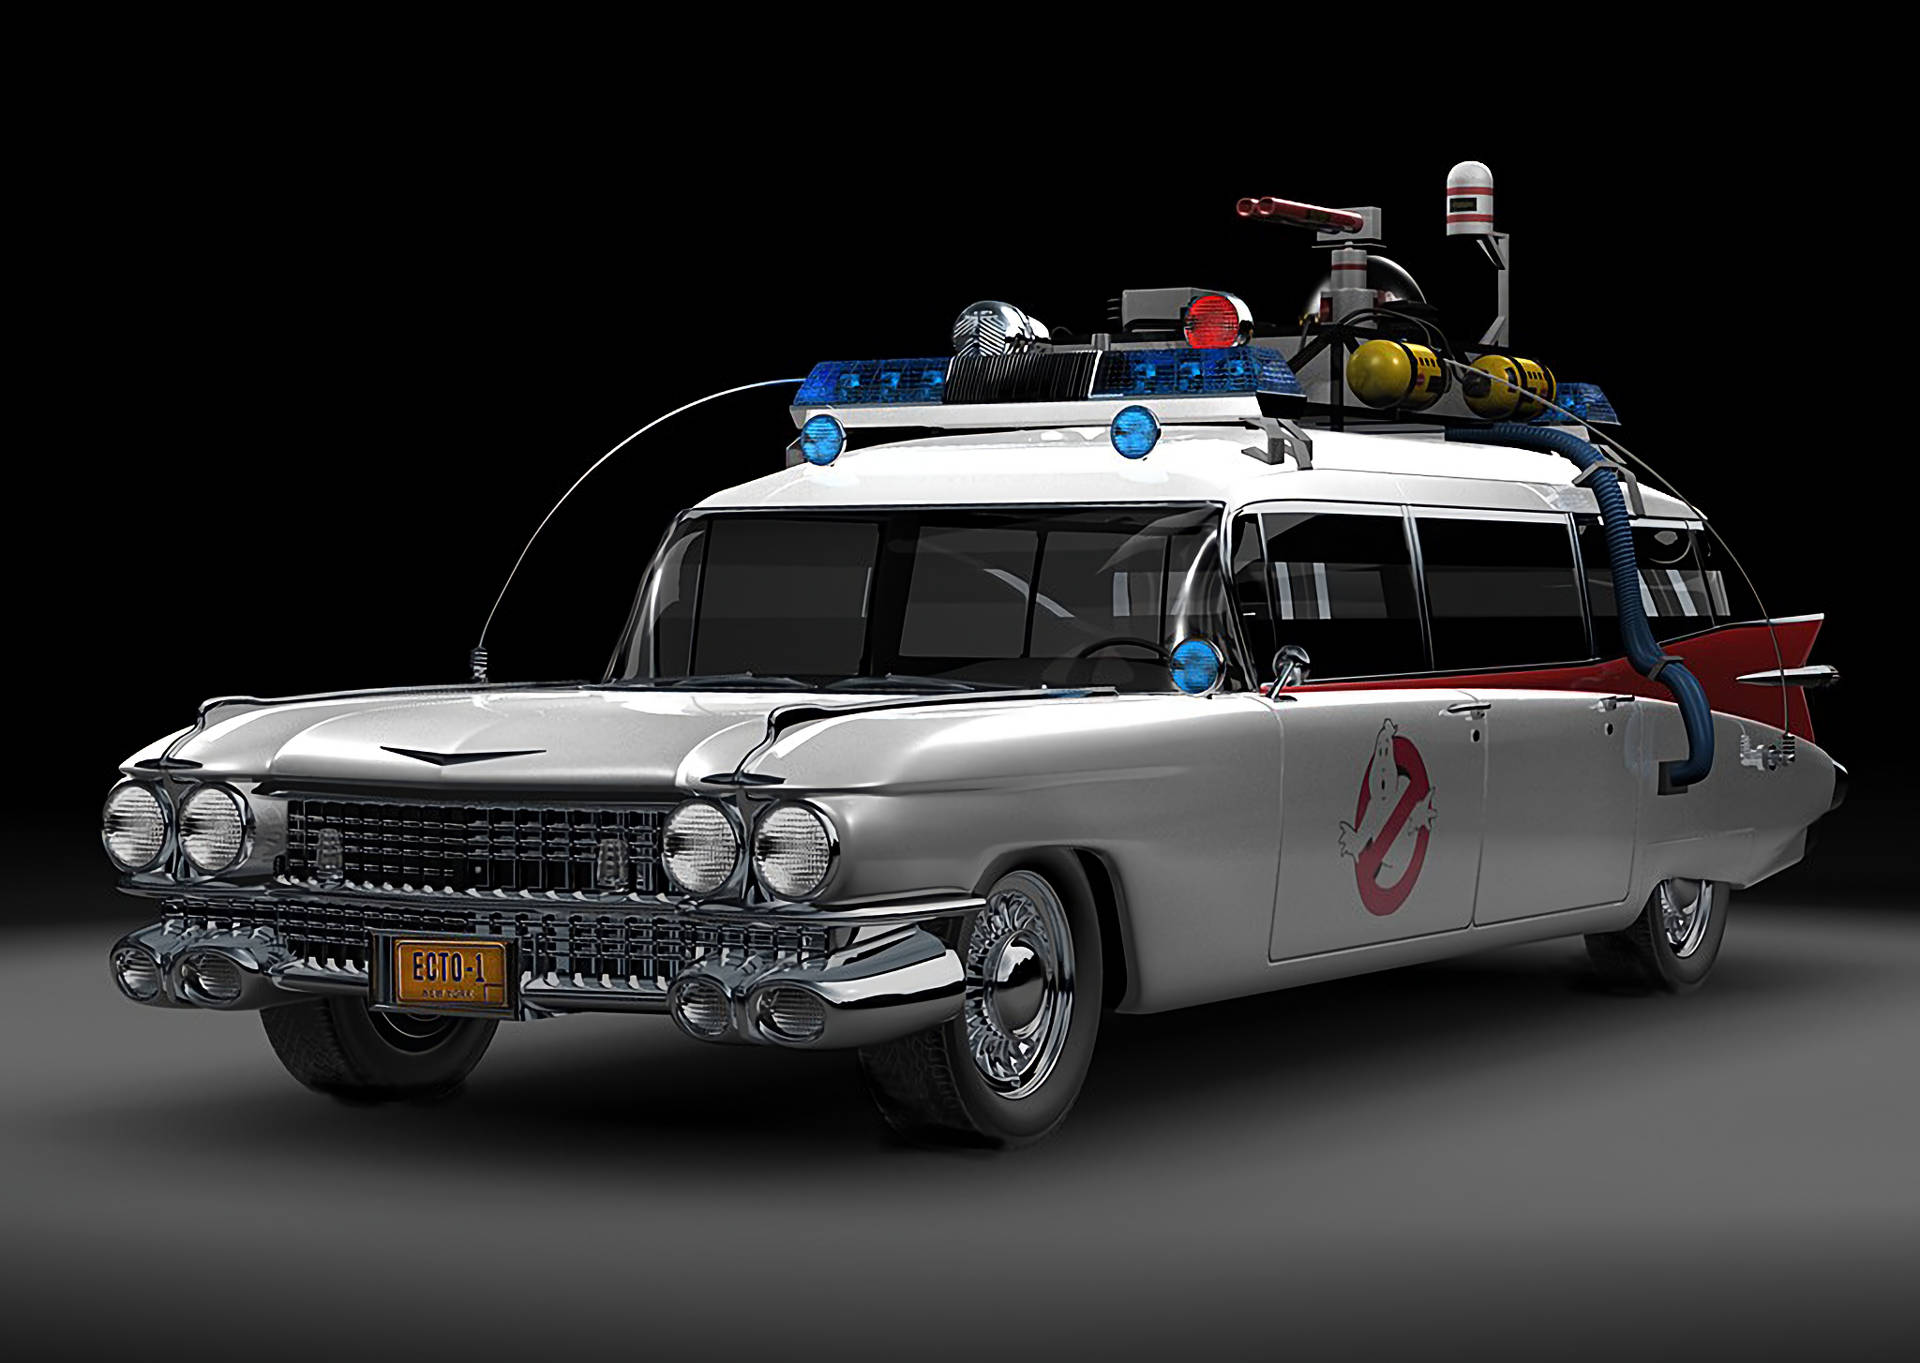 Animated Ghostbusters Ecto-1 Car Background